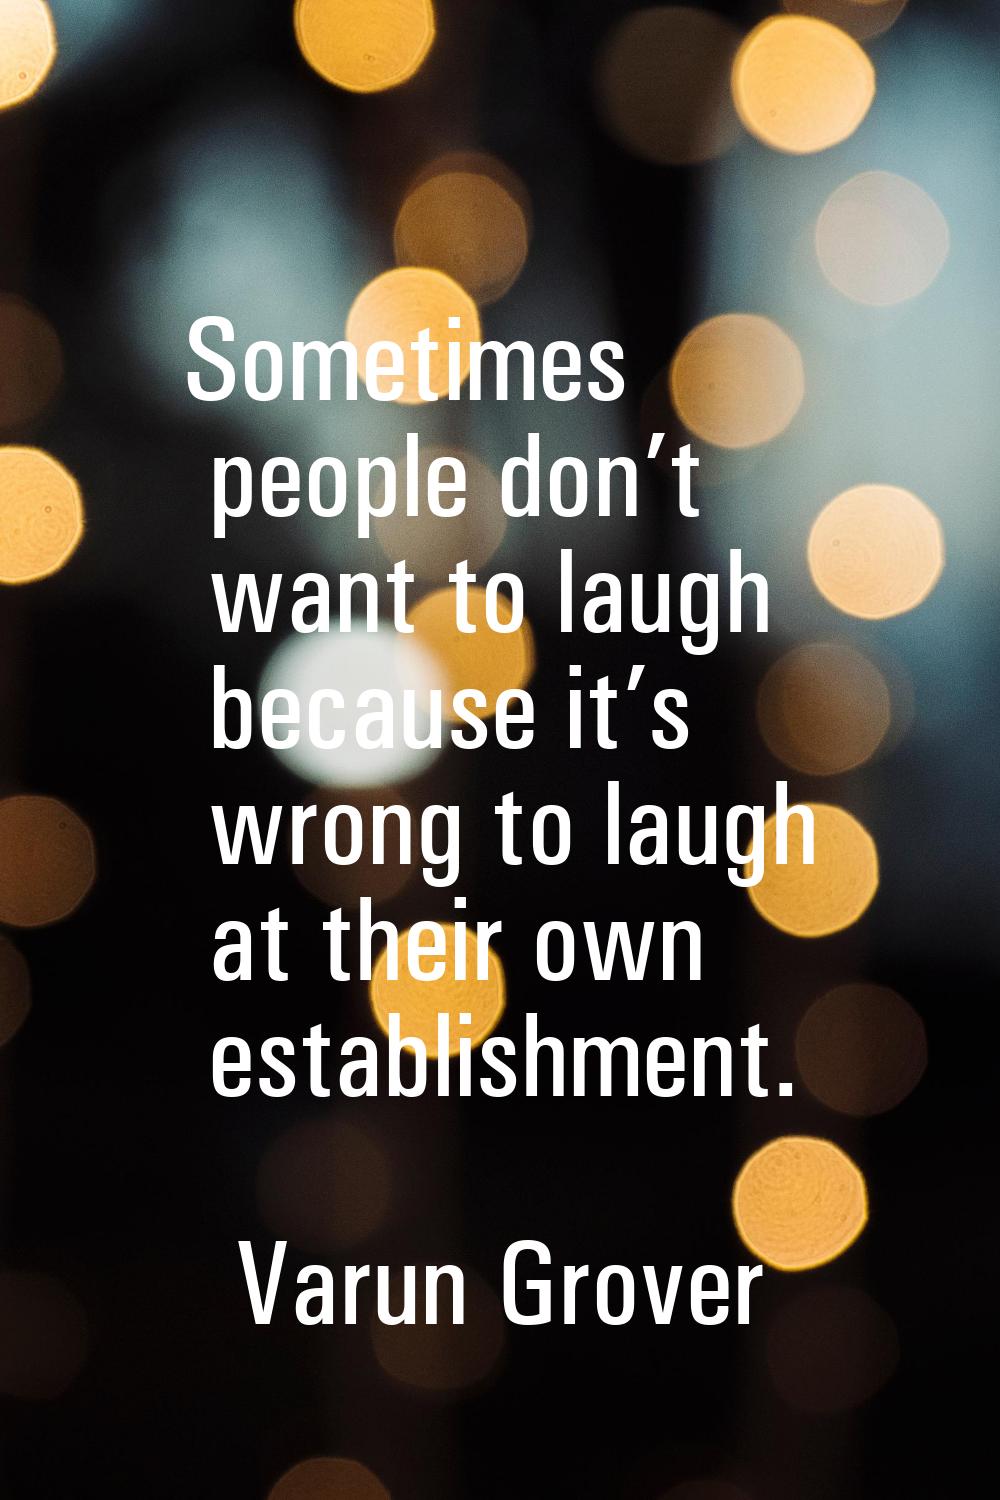 Sometimes people don’t want to laugh because it’s wrong to laugh at their own establishment.